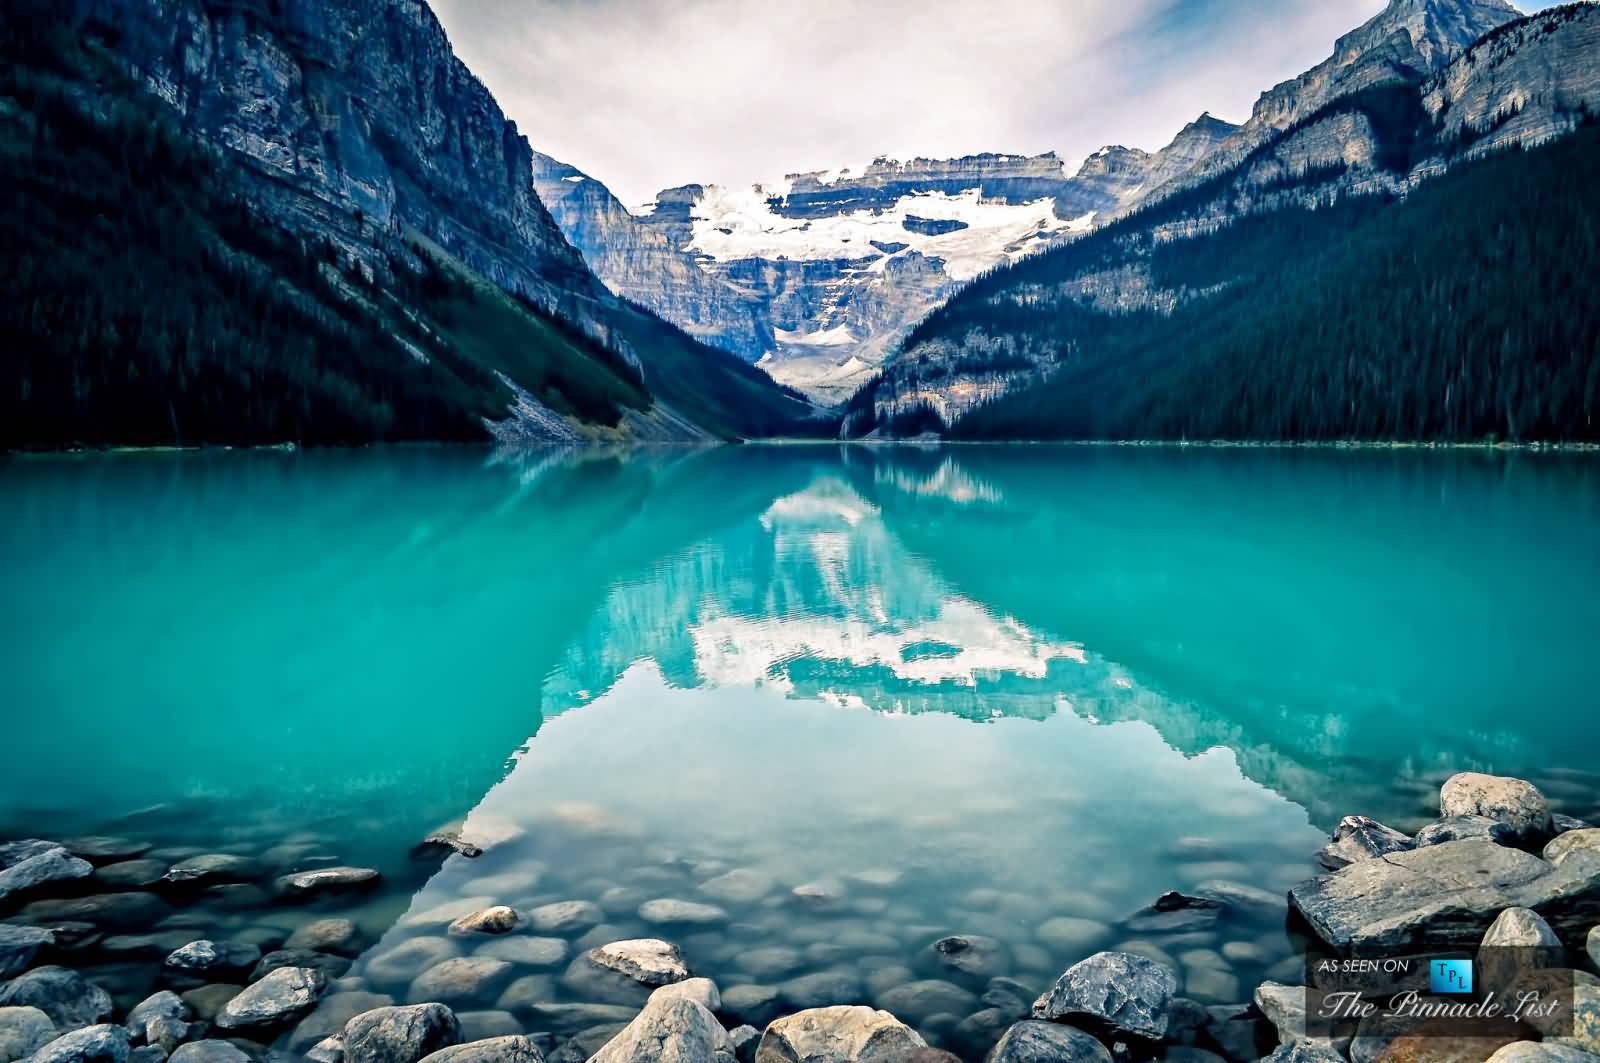 The Marvelous Crystal Blue Lake Louise At Banff National Park In Alberta, Canada